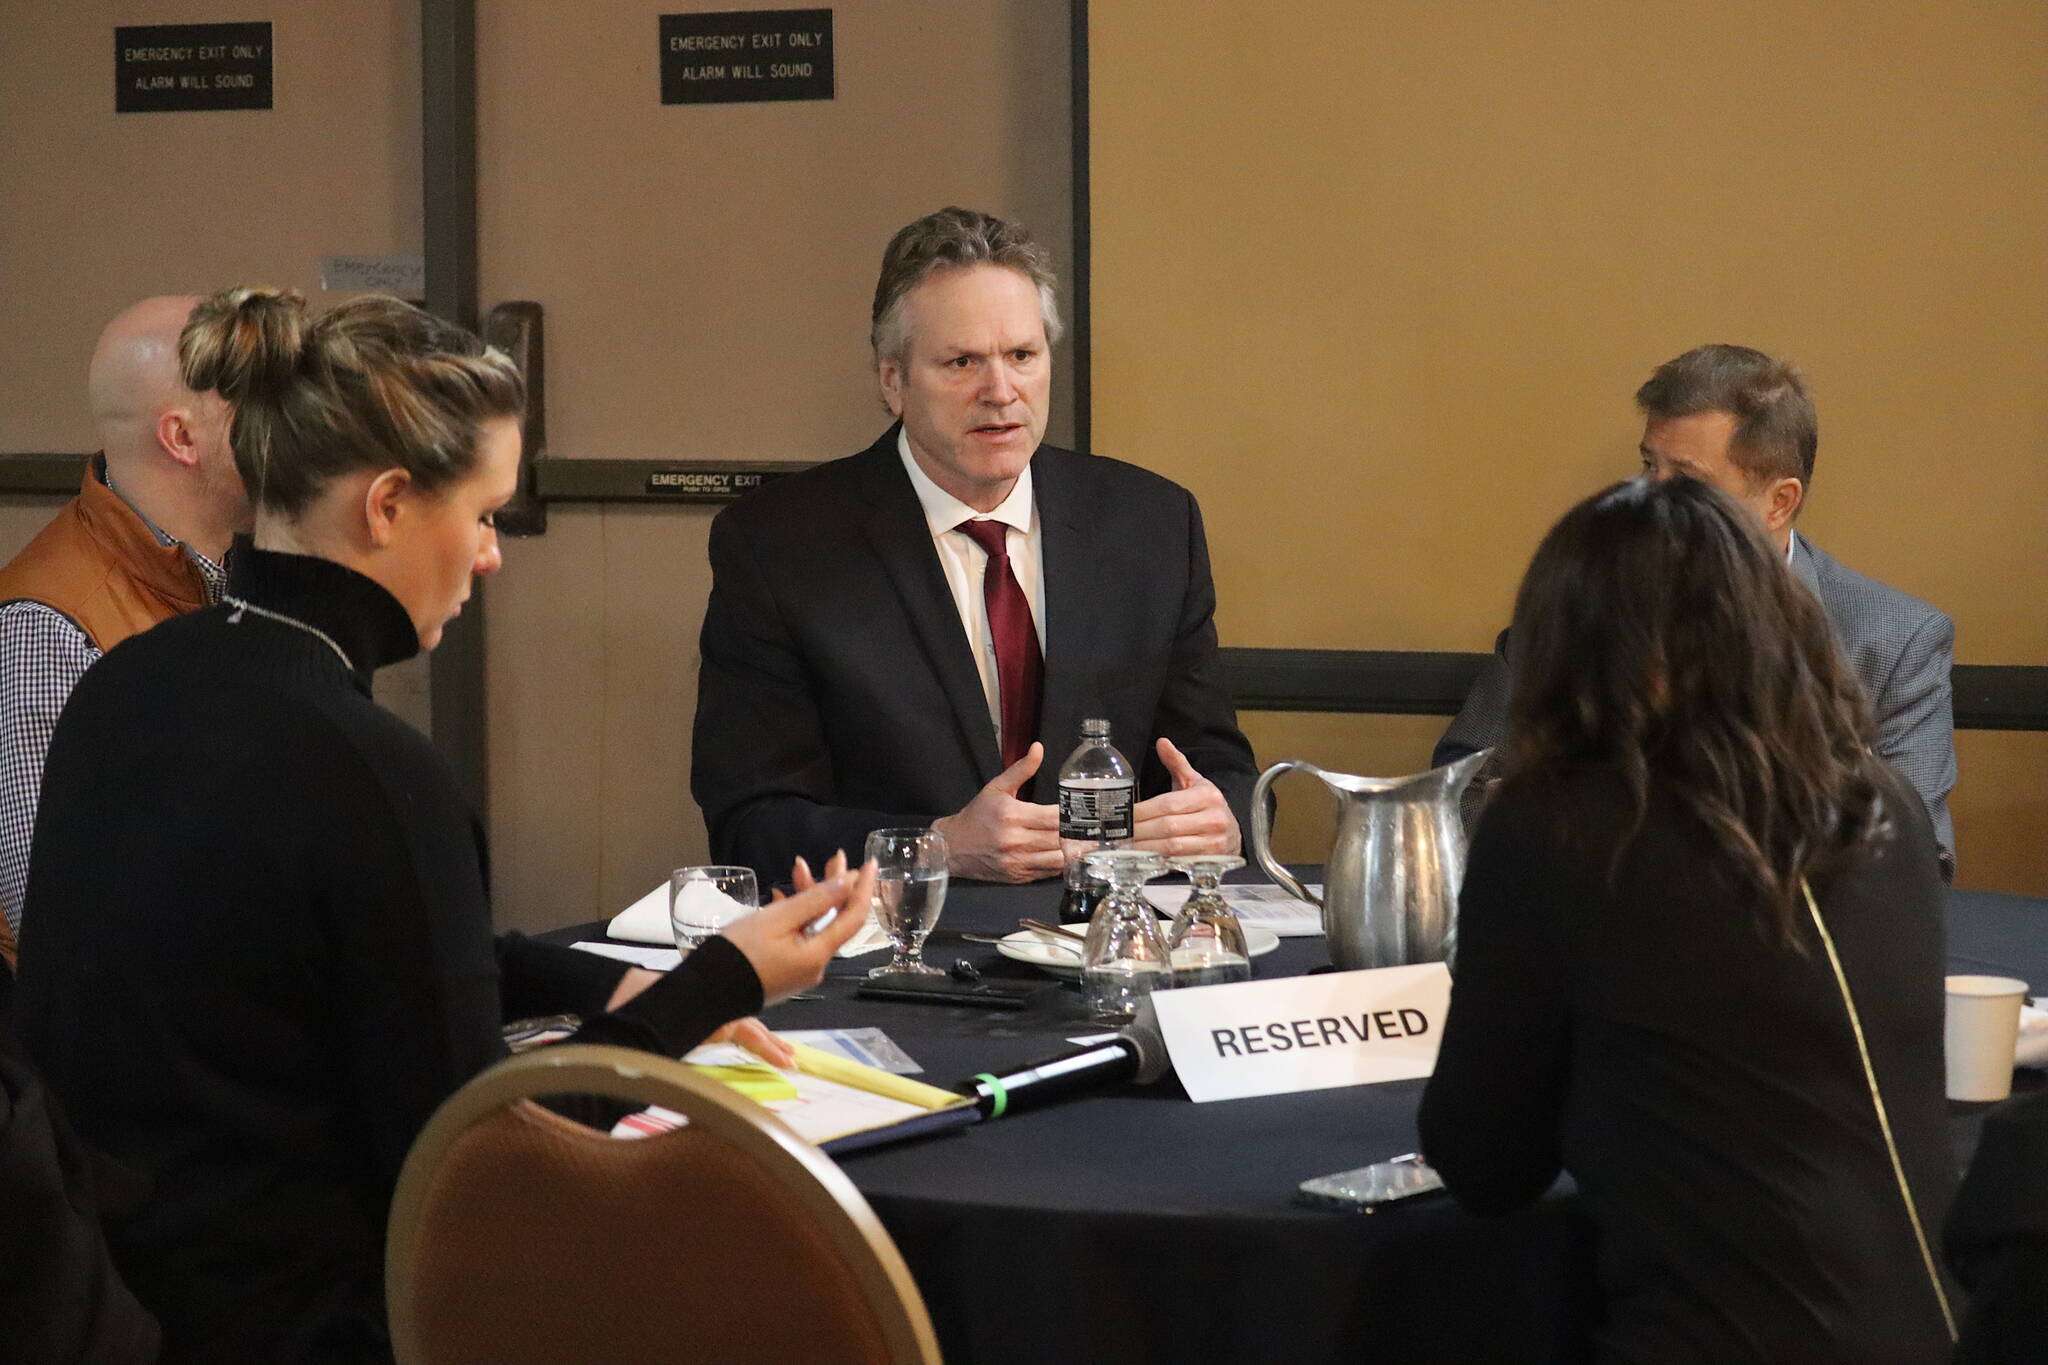 Gov. Mike Dunleavy talks about his second-term agenda with members of the Alaska Chamber of Commerce, which is doing a two-day legislative fly-in this week, before his speech during the Juneau Chamber’s weekly luncheon Thursday. The speech and subsequent question period was at the Baranof Hotel to accommodate the extra out-of-town guests spending much of their time at the Alaska State Capitol, rather than the usual location at the Juneau Moose Lodge Family Center. (Mark Sabbatini / Juneau Empire)